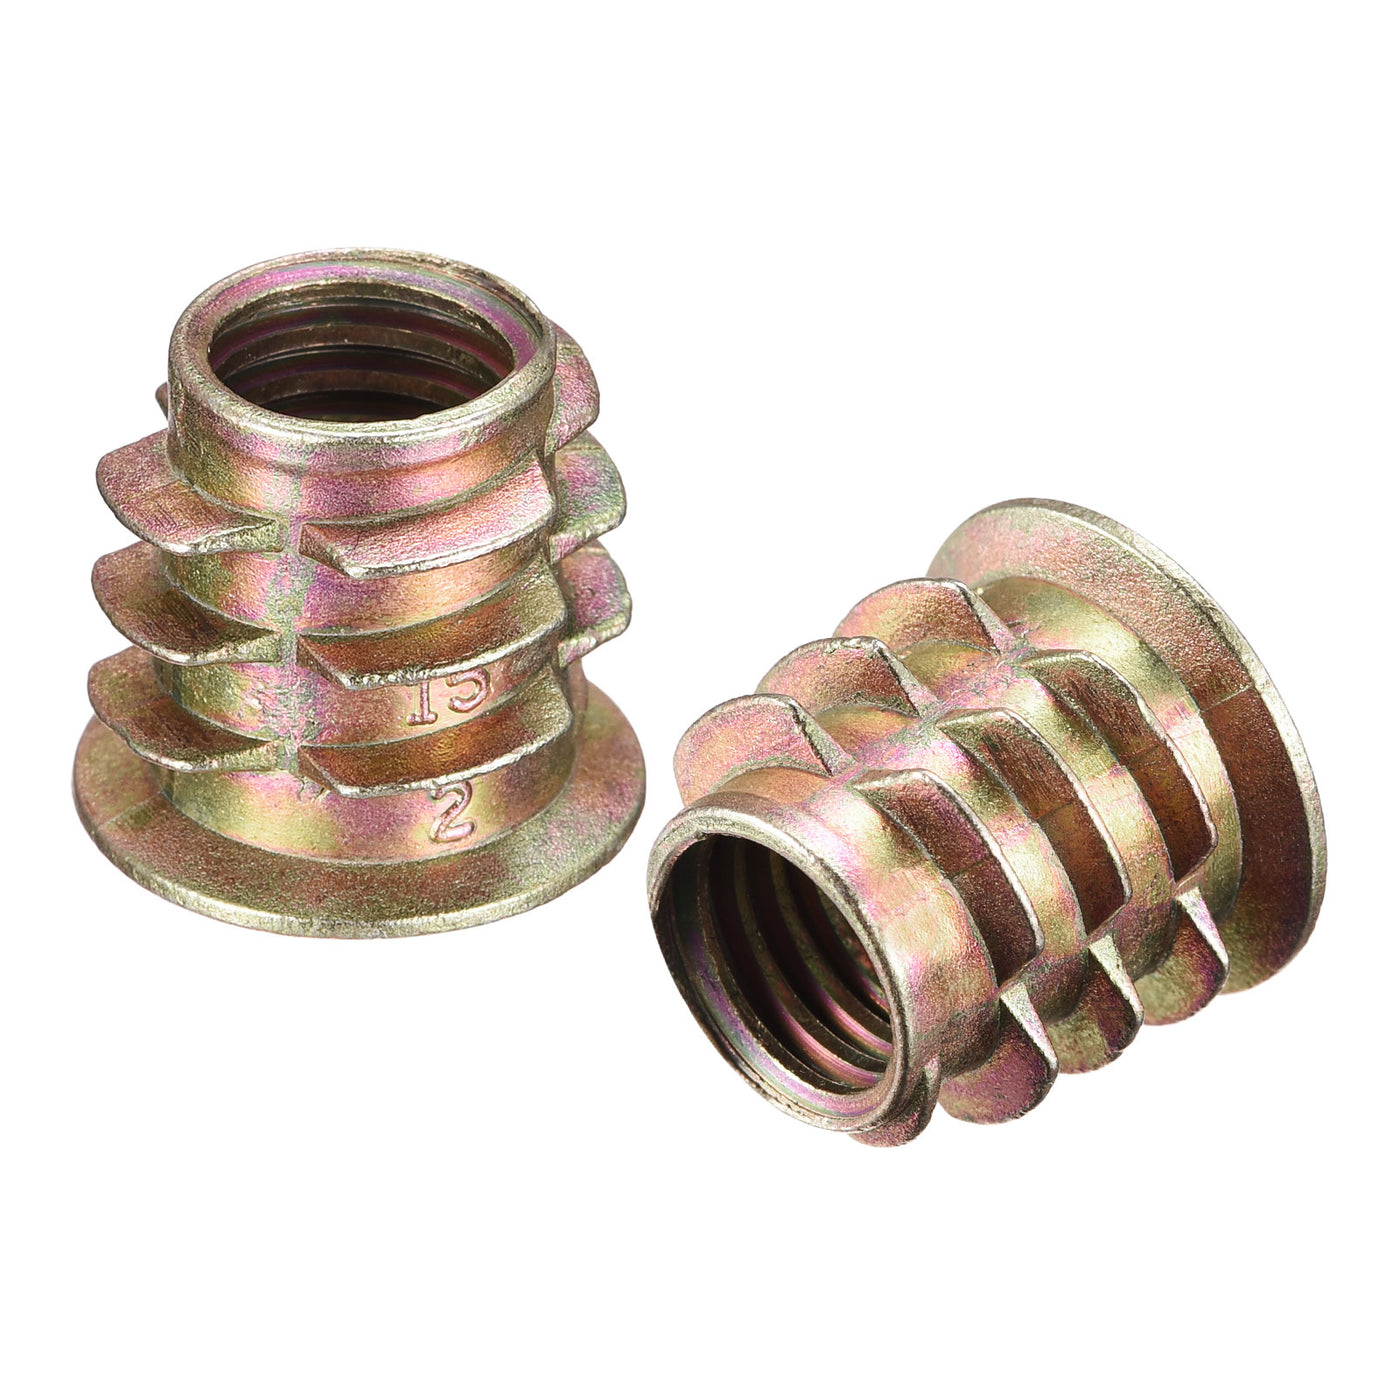 Uxcell Uxcell M10x15mm Furniture Screw-in Nut Zinc Alloy Threaded Insert Nuts for Wood 12pcs